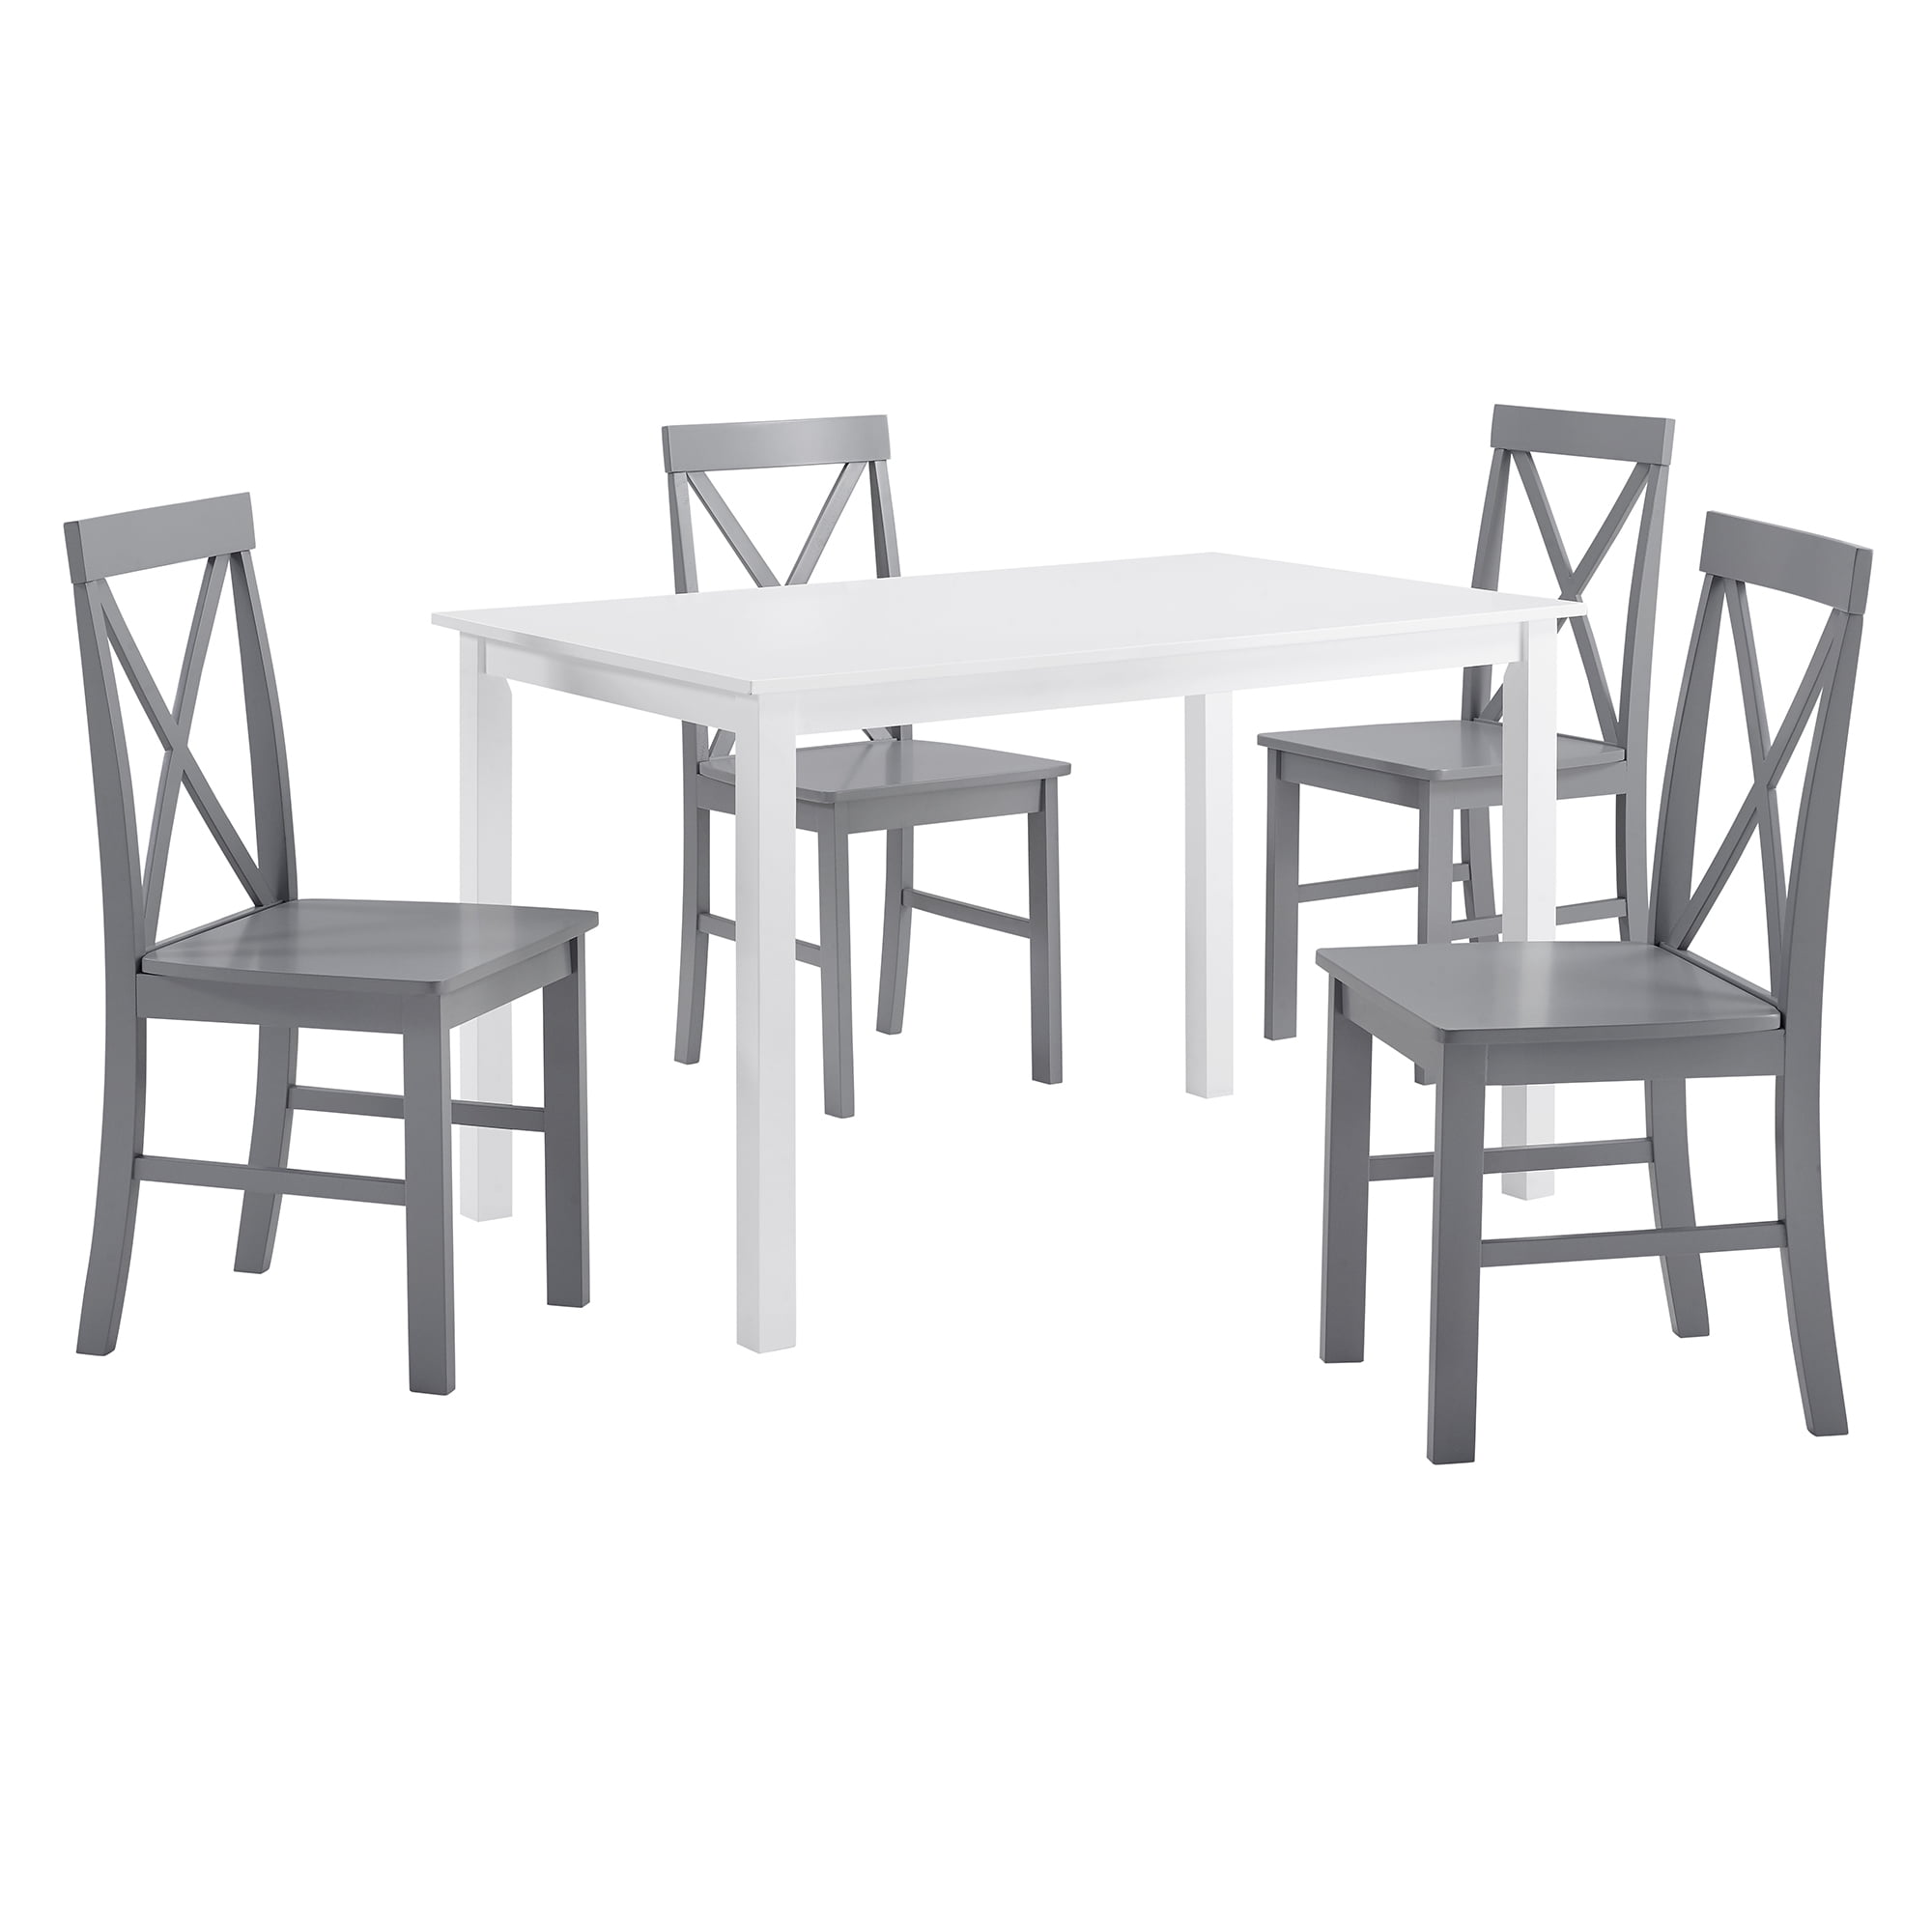 Solid Pine Wooden Dining Table and 4 Chairs Set Home Kitchen Furniture Set,White/Grey I Shape 